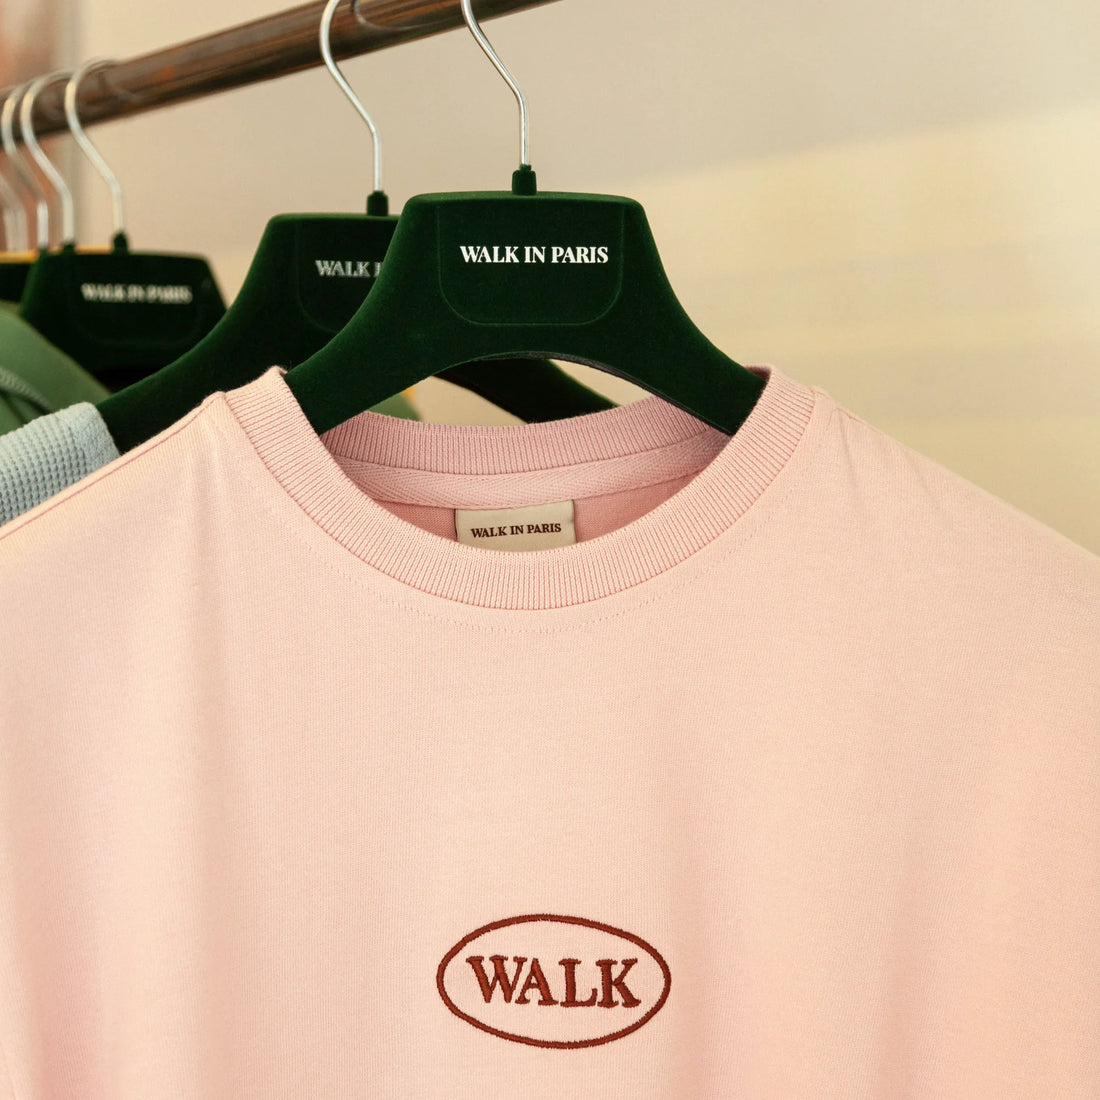 THE CLASSIC PINK T-SHIRT